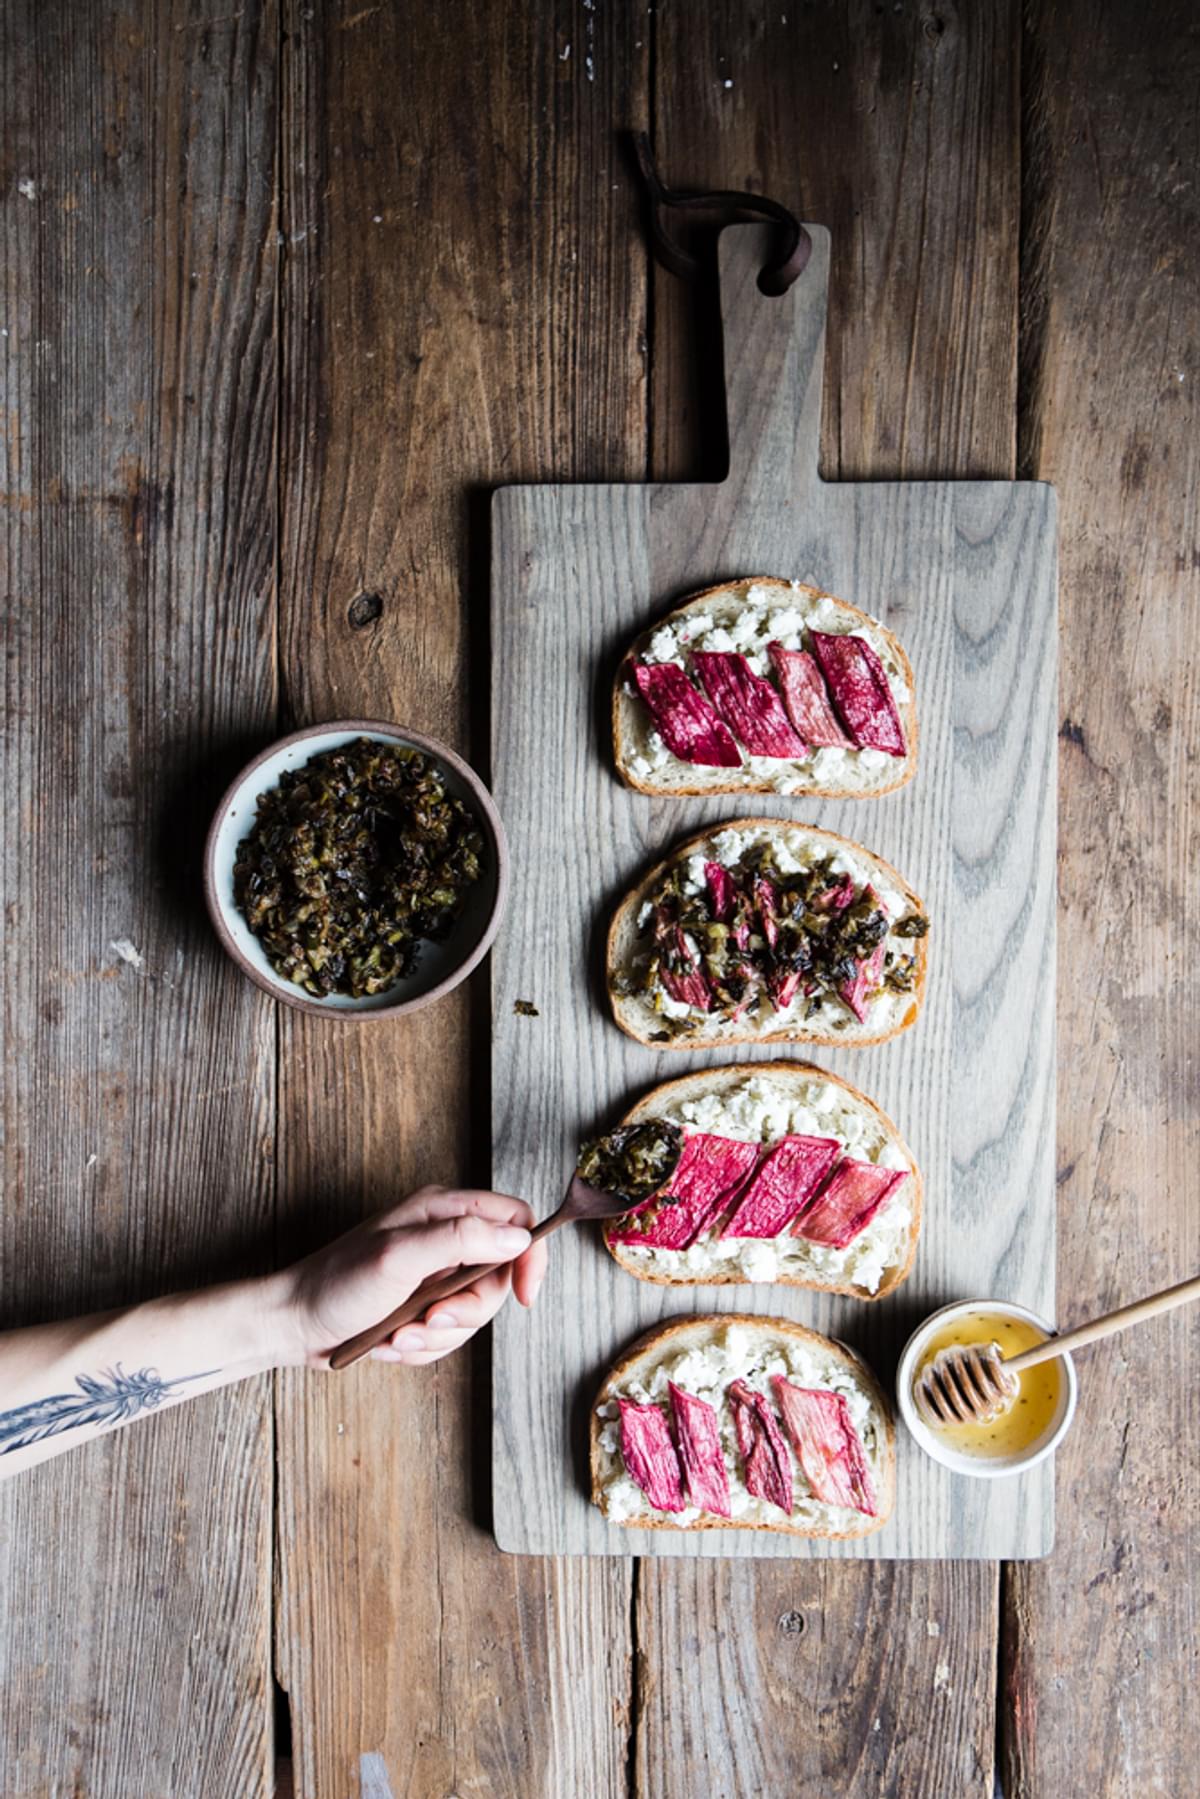 Roasted Rhubarb and Chevre Grilled Cheese with caramelized spring onions